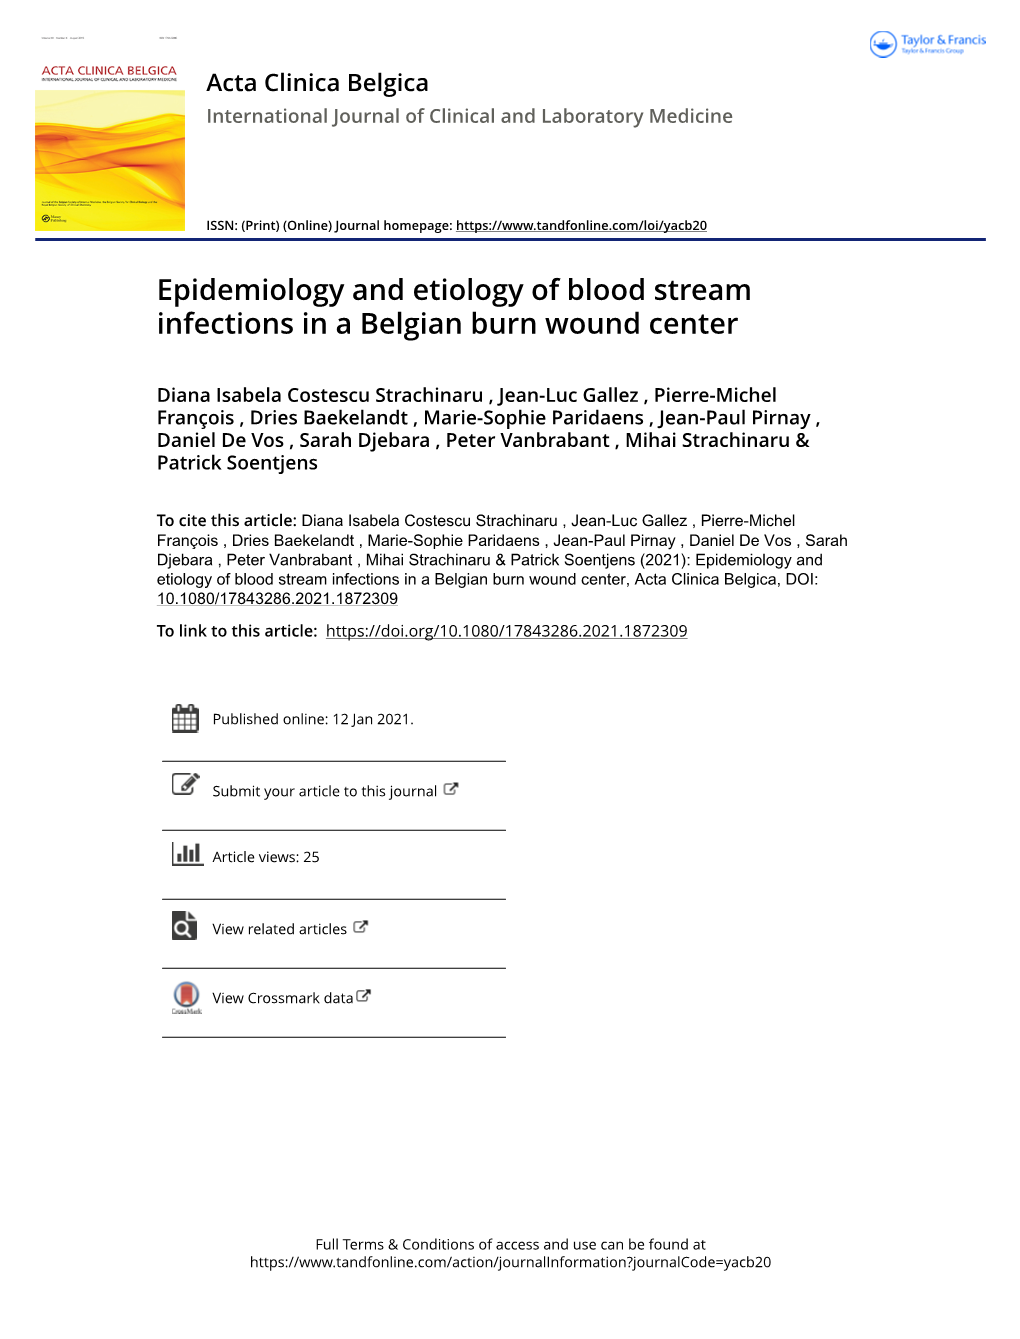 Epidemiology and Etiology of Blood Stream Infections in a Belgian Burn Wound Center